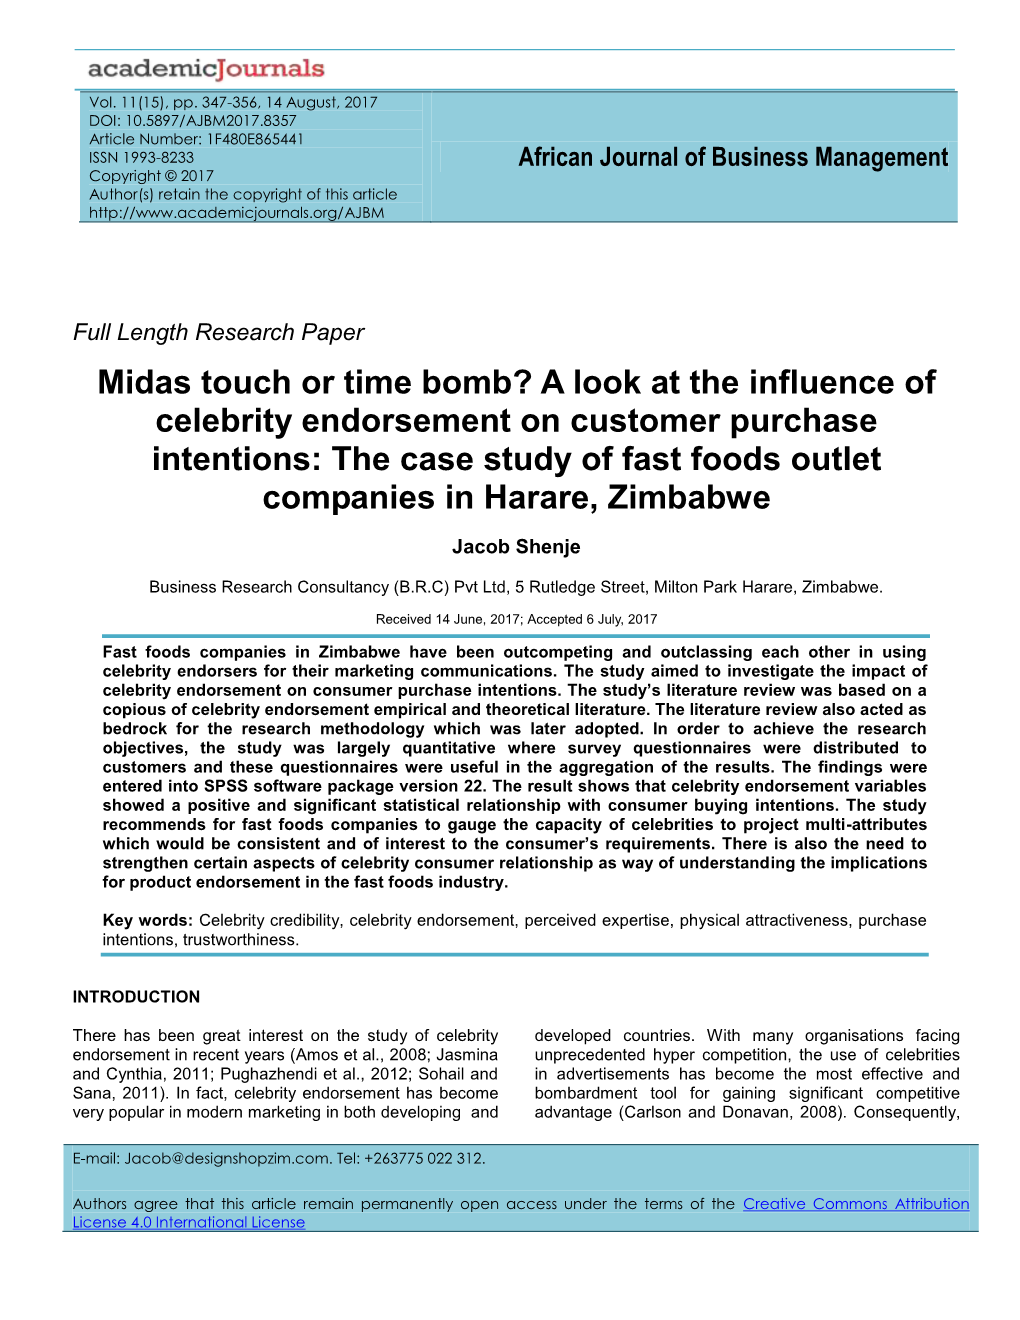 A Look at the Influence of Celebrity Endorsement on Customer Purchase Intentions: the Case Study of Fast Foods Outlet Companies in Harare, Zimbabwe